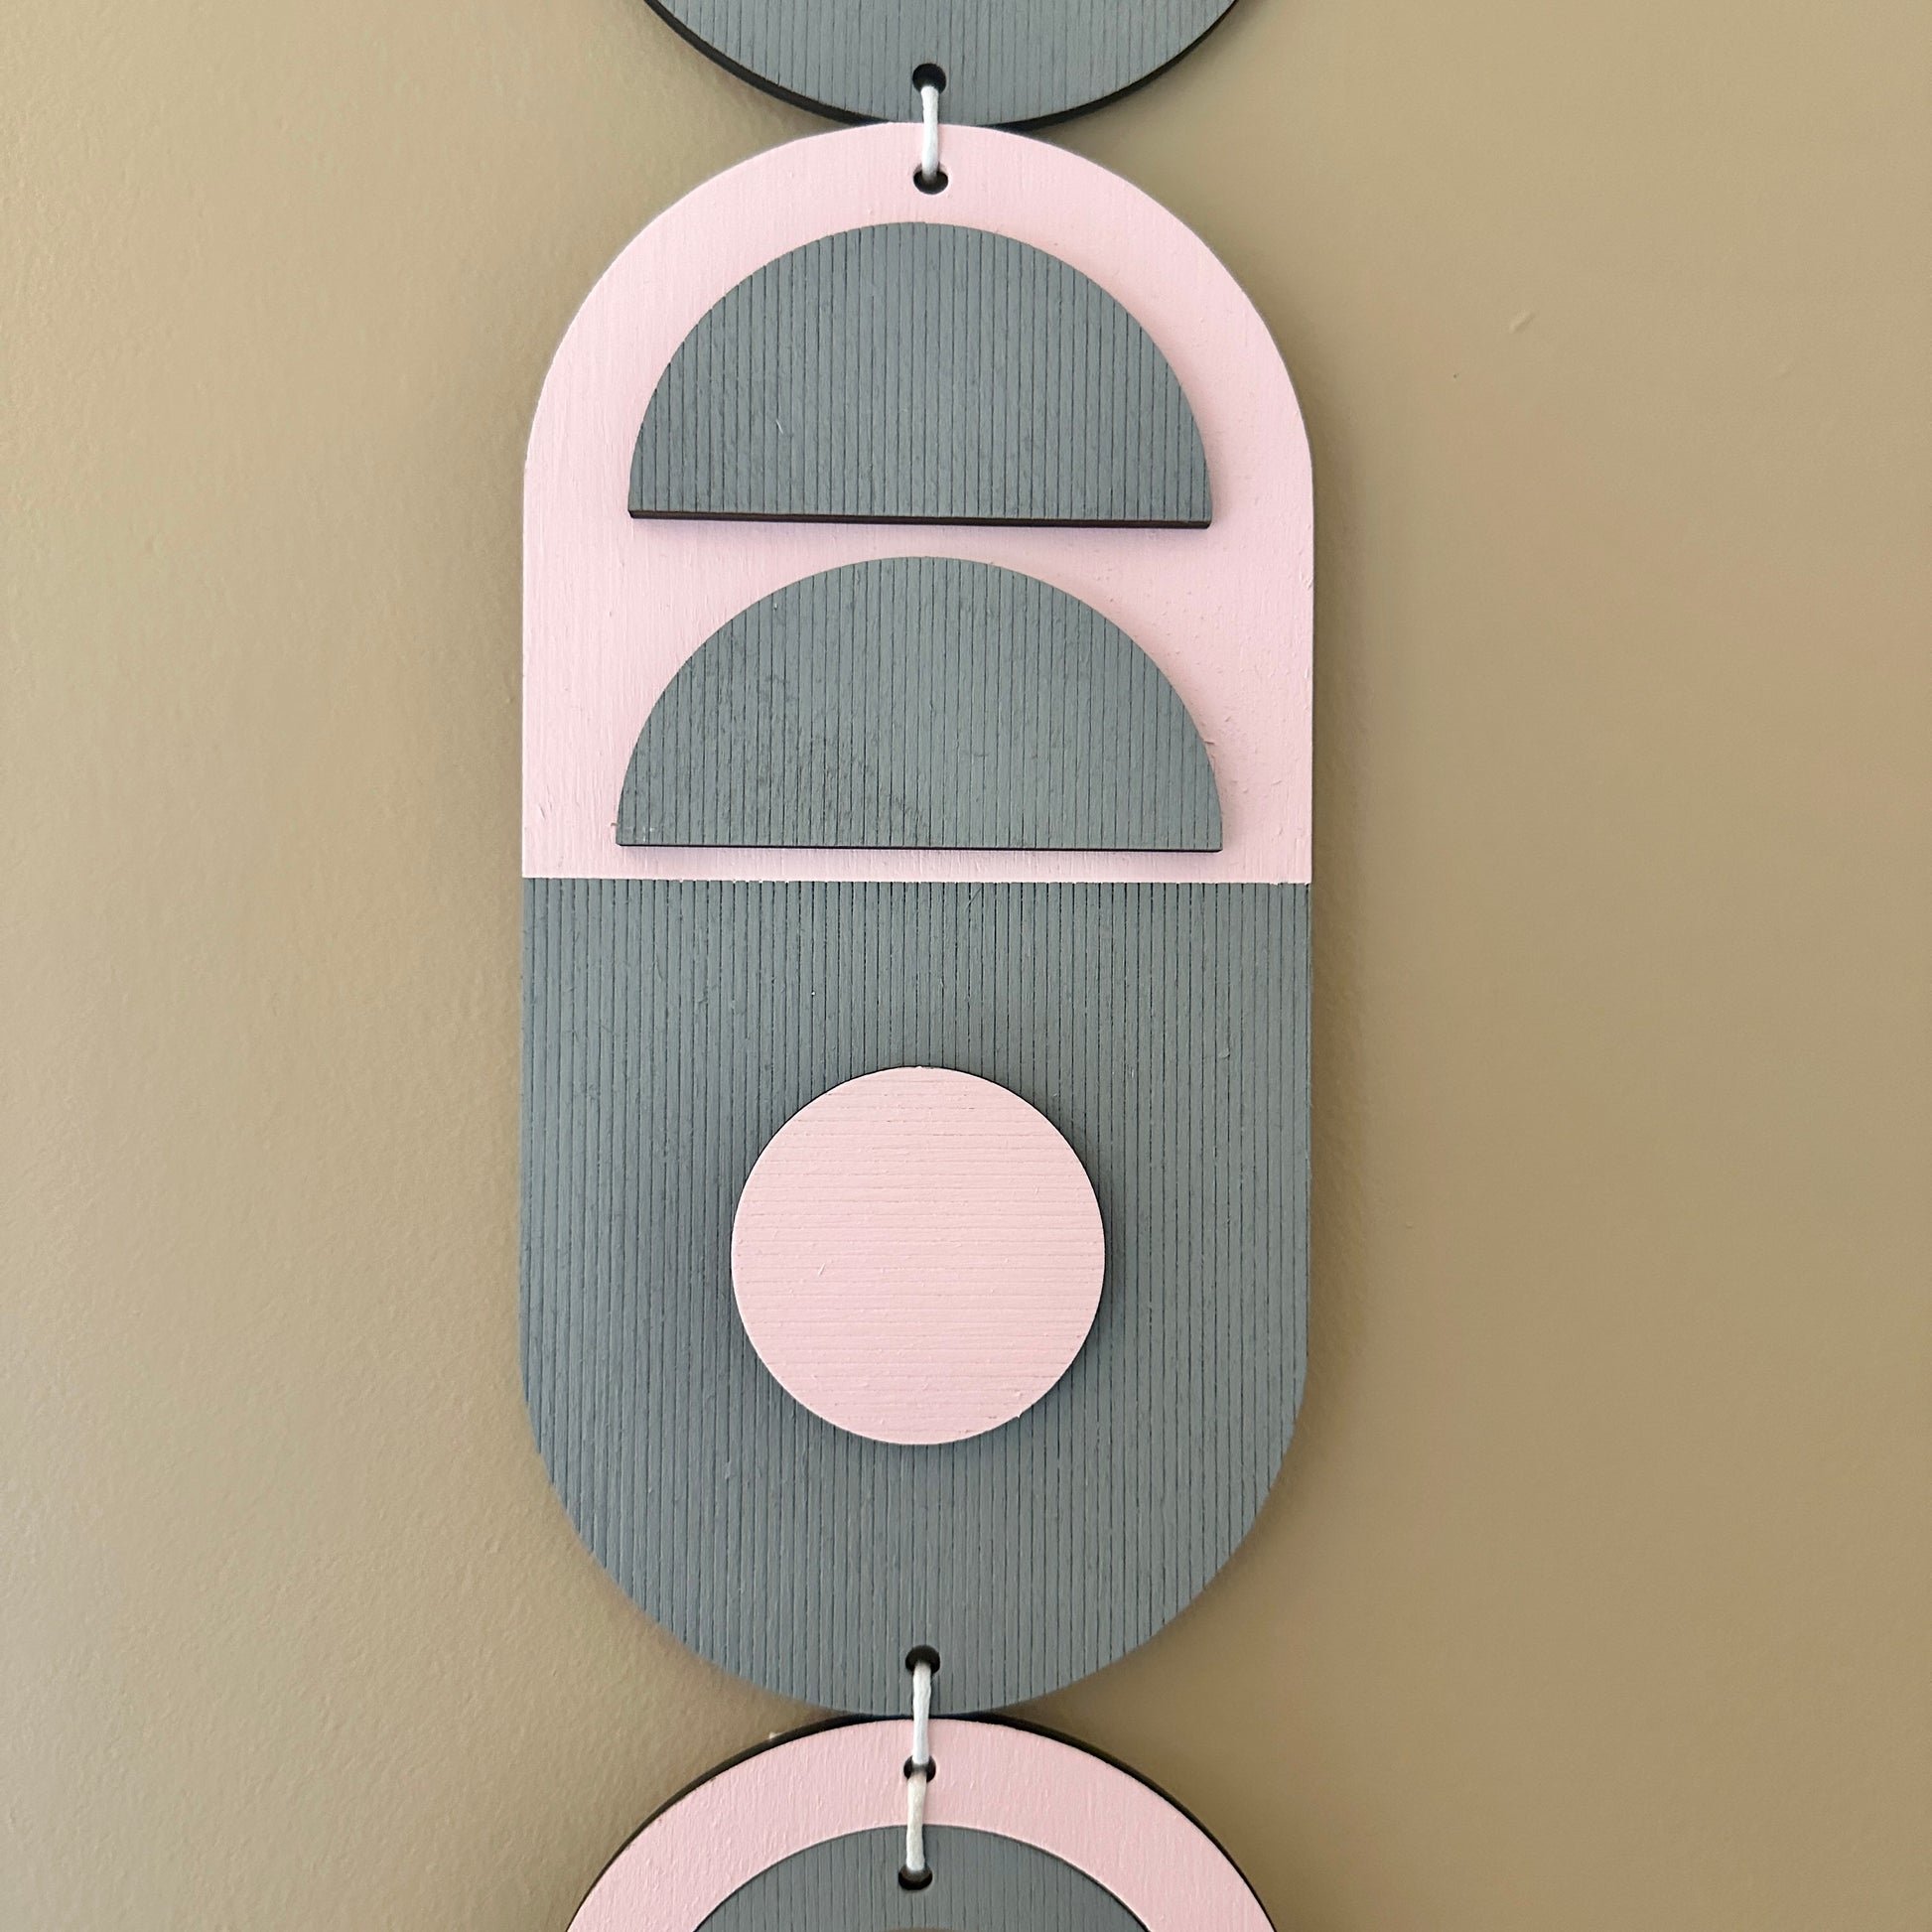 A vibrant pink and grey handmade geometric wood wall hanging. Featuring a textured effect through layer wood pieces and laser etching. Measuring 68cm in length x 10cm wide